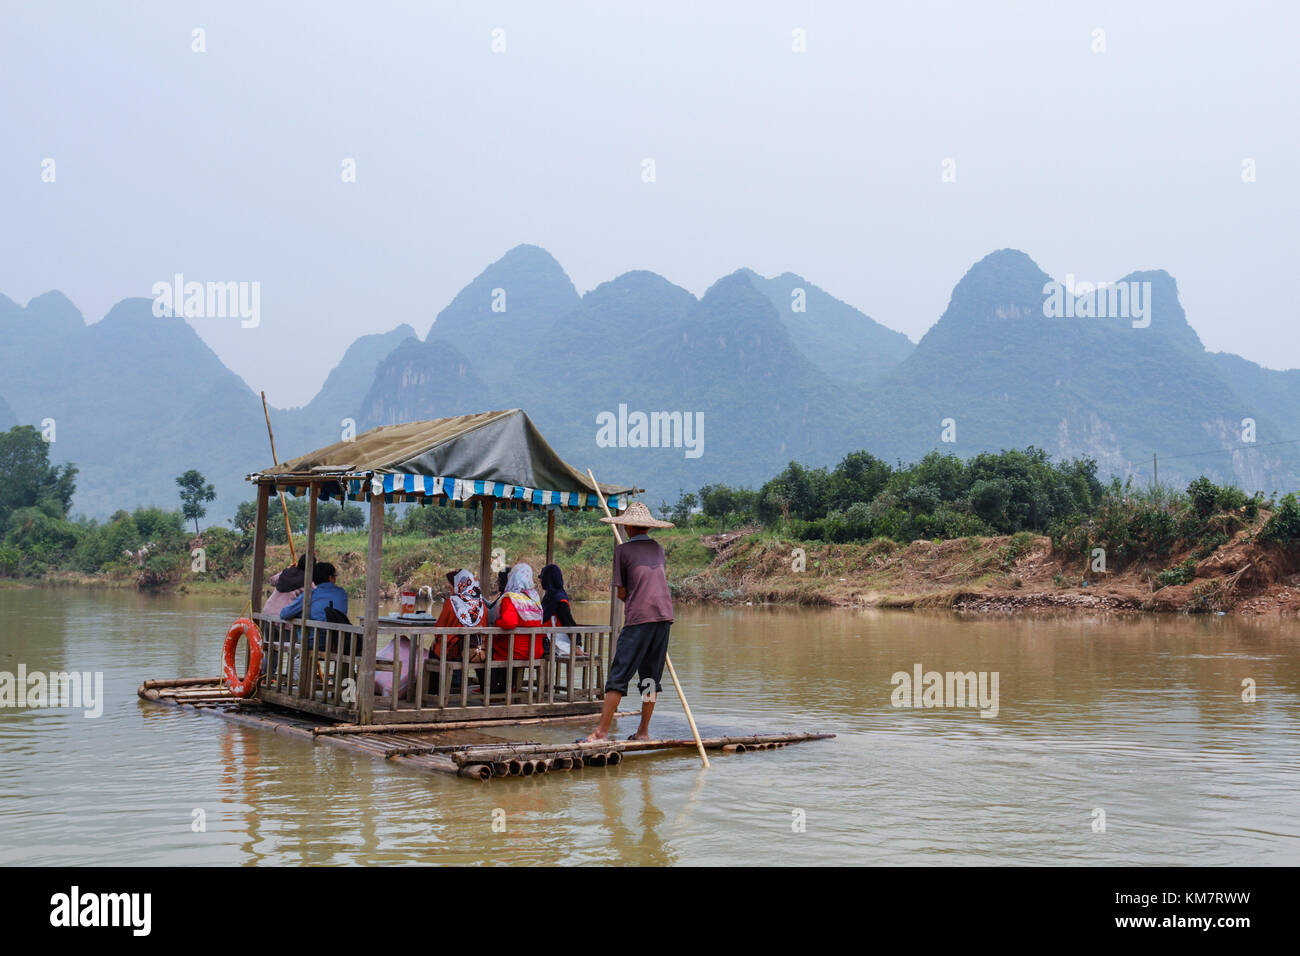 Muslim tourists on bamboo raft at Li River in Guilin, China. Stock Photo